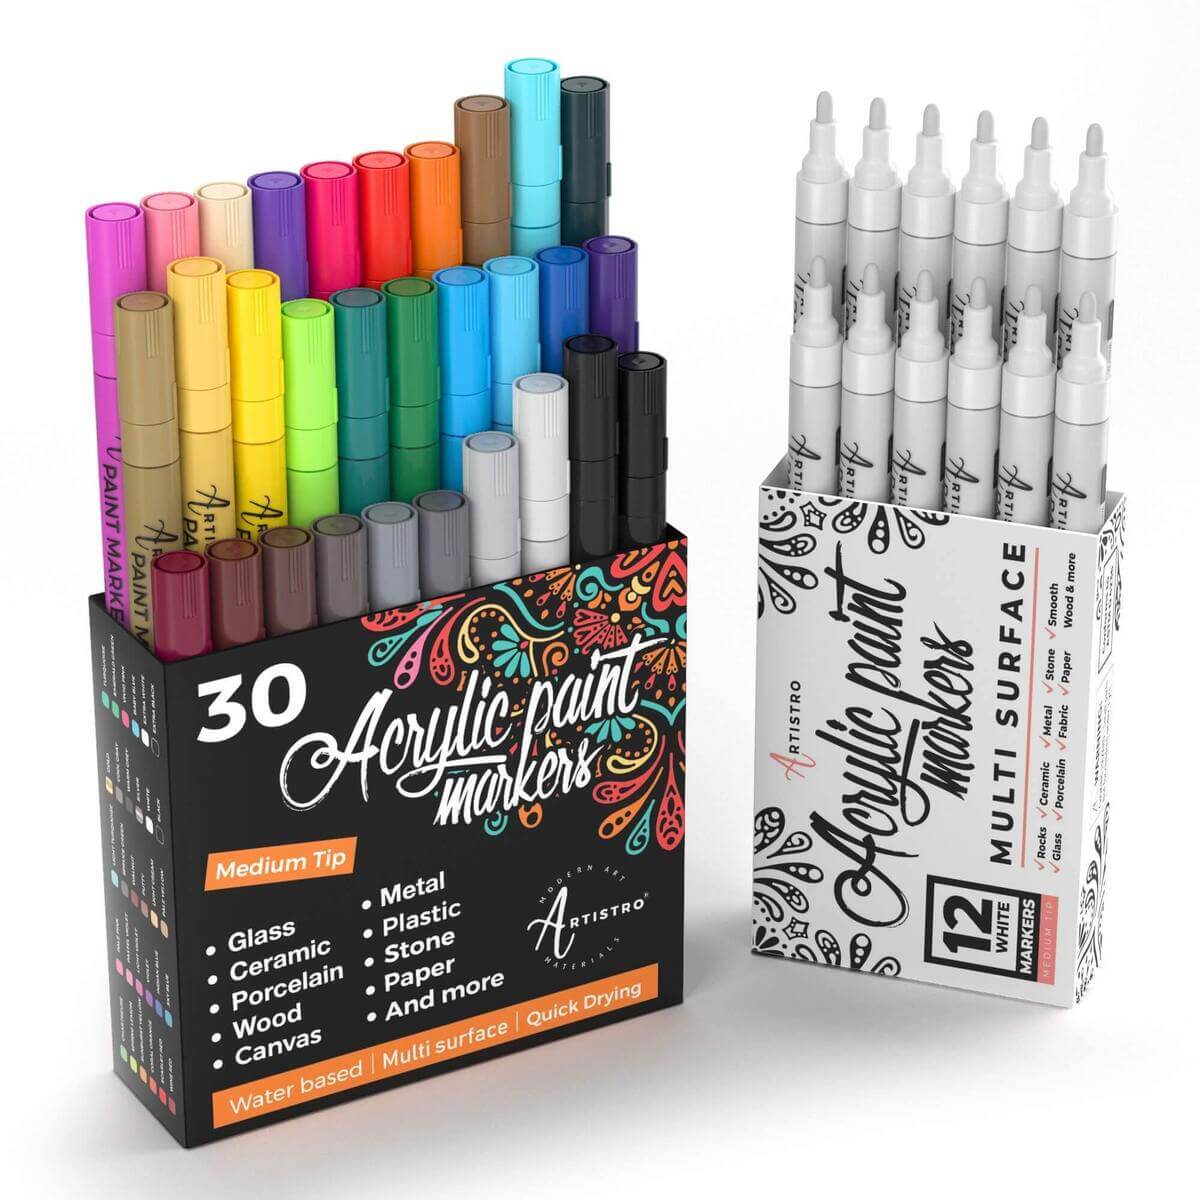 45 Artistro Acrylic Paint Pens 30 Medium 15 Fine Tip Markers Set for Kids  Craft, Family Painting, Rock Painting, Artist Gifts, Wood Art 